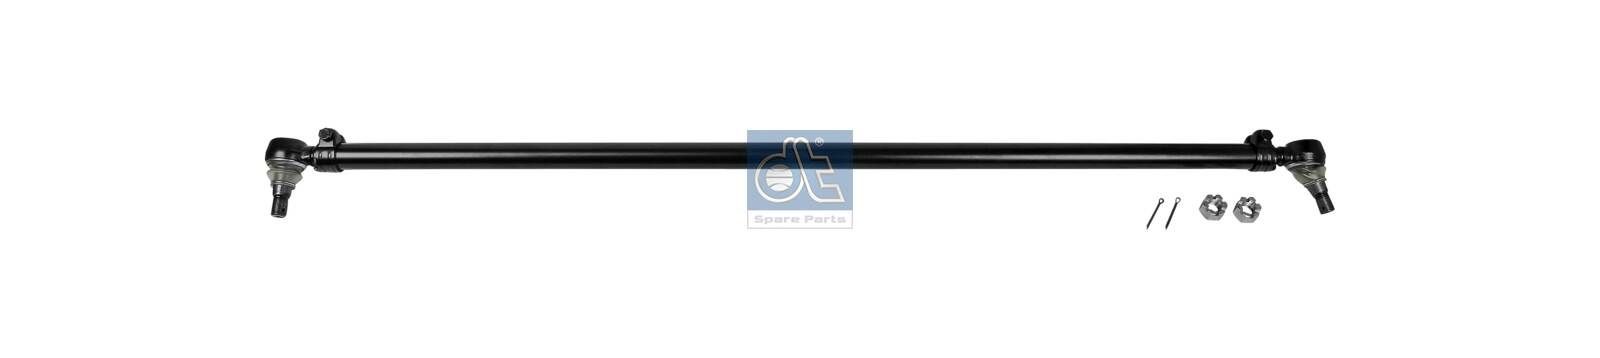 DT Spare Parts 2.53116 Rod Assembly 20 581 086